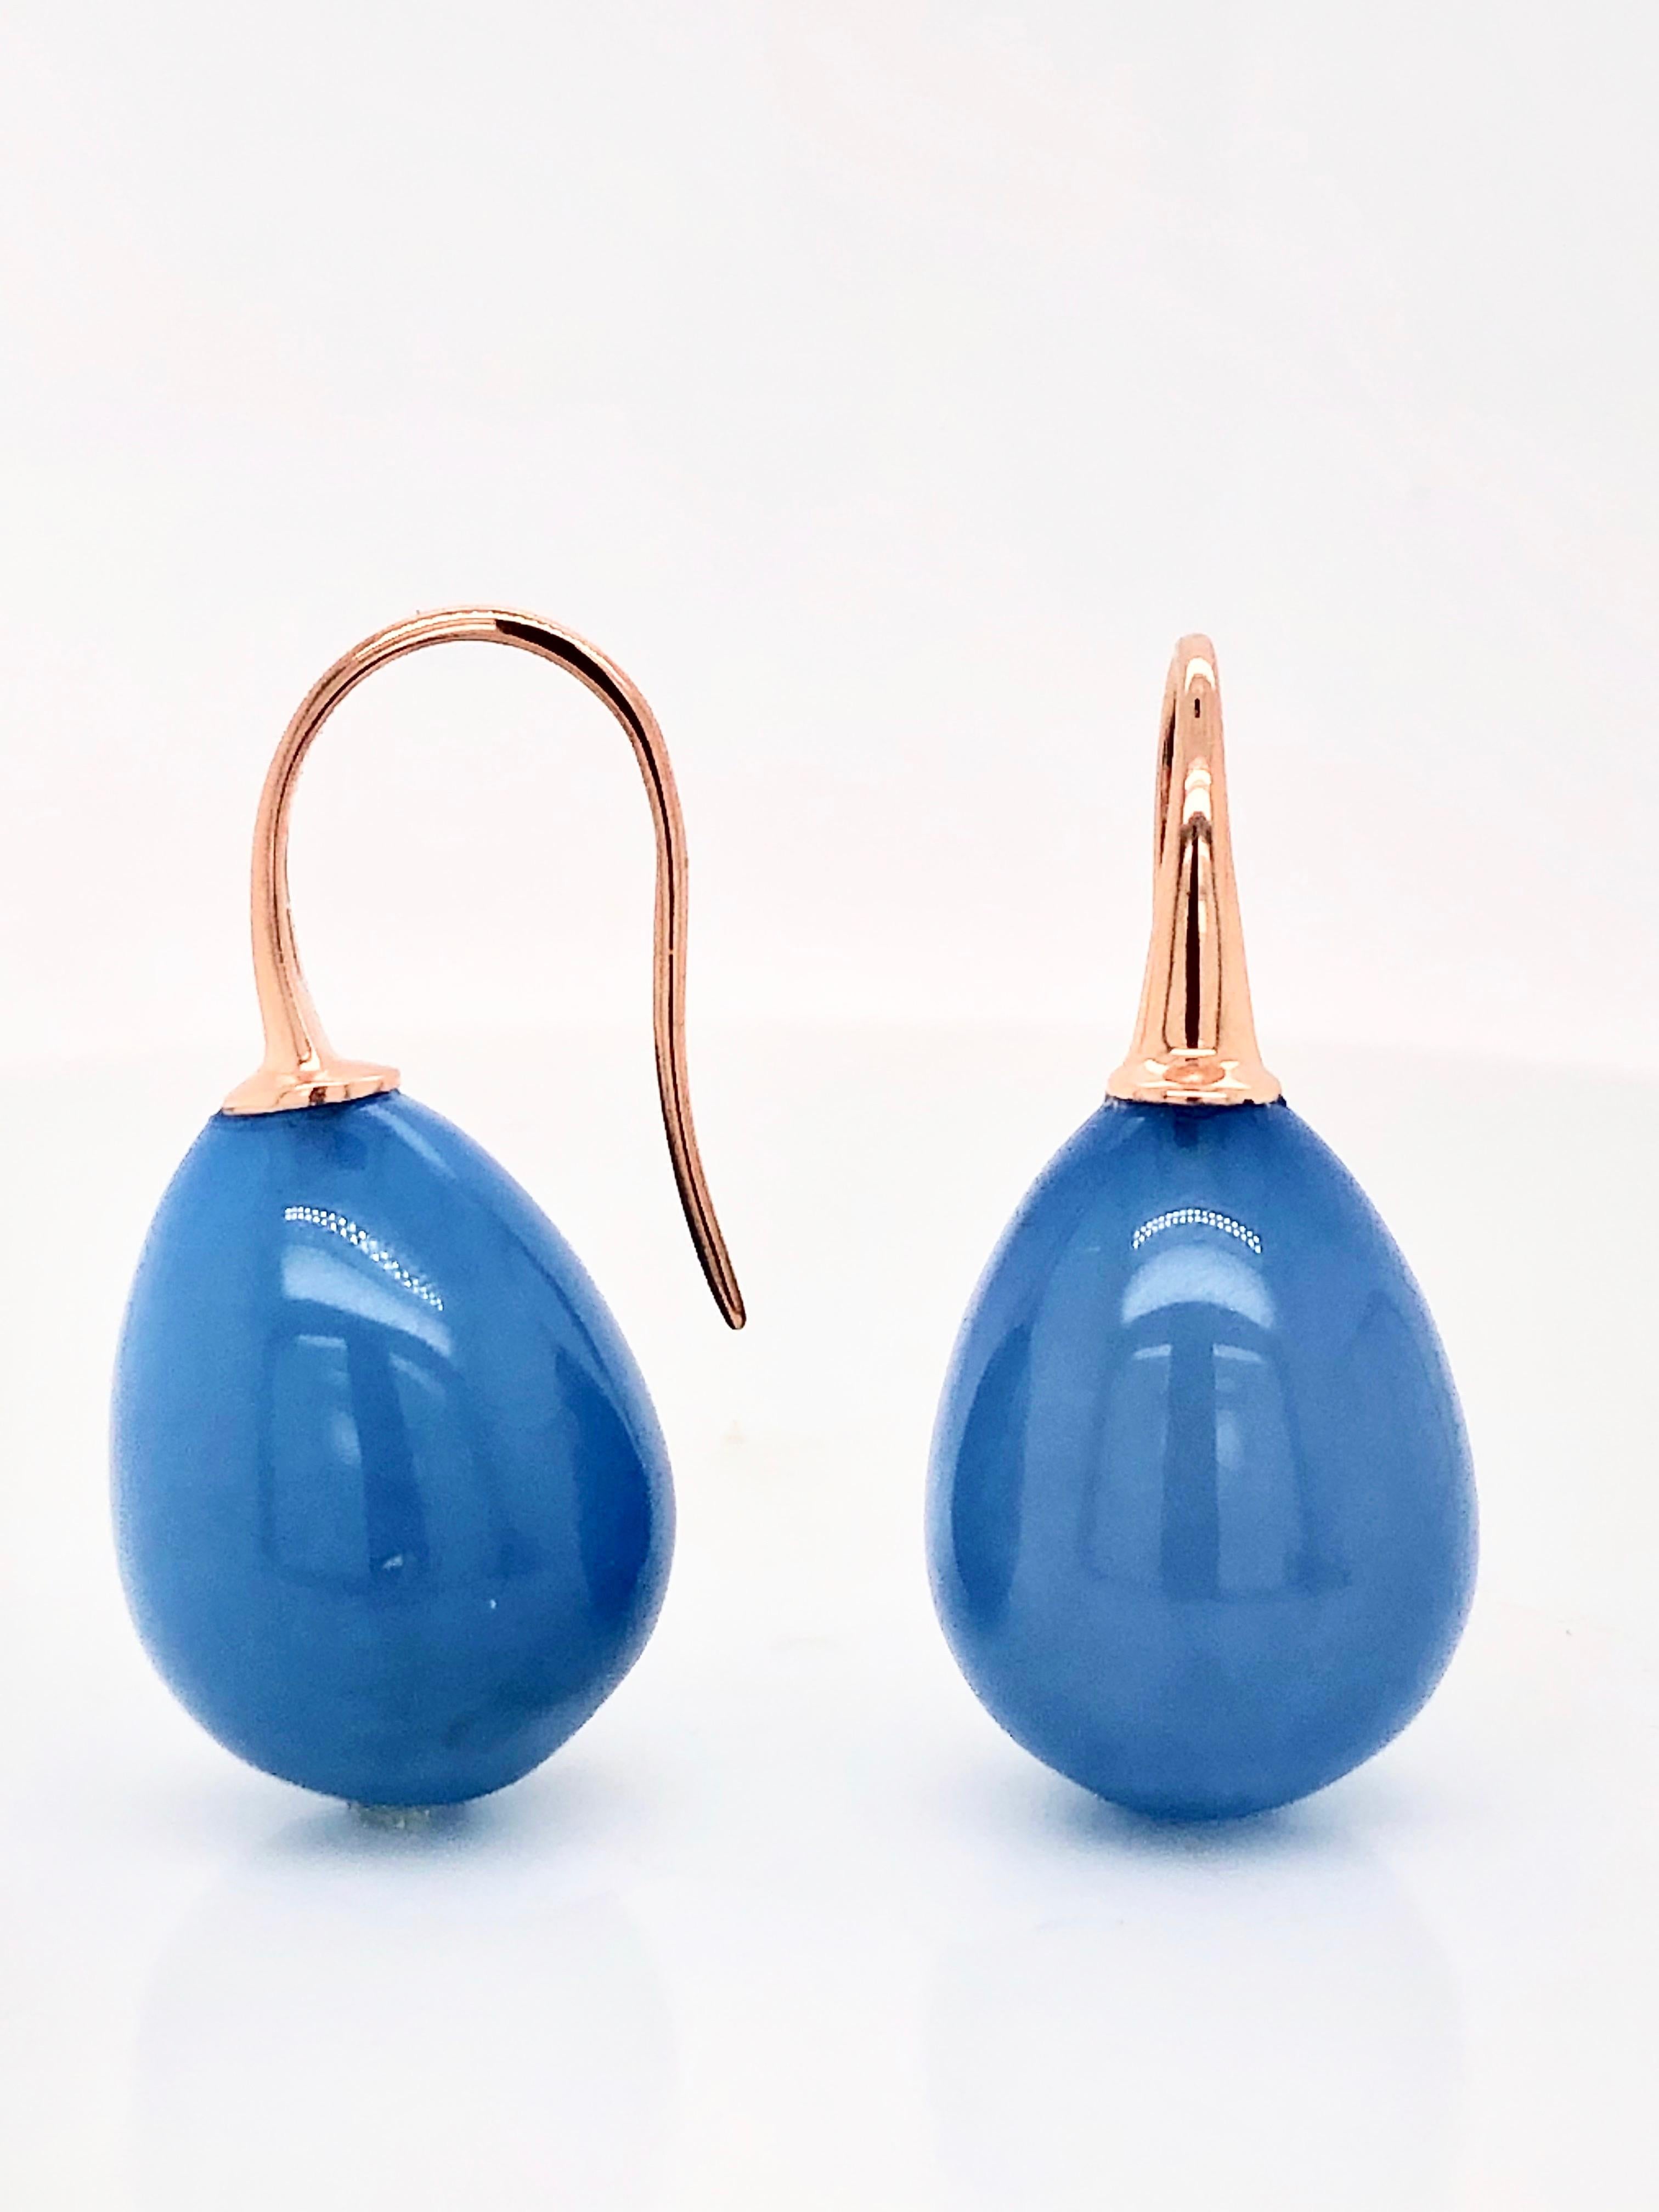 Blue Agate on Rose Gold Earring
Pink gold  Drop Earrings
Vela Blue Agathe
Rose Gold 18k
Weight of Gold / 2 grams